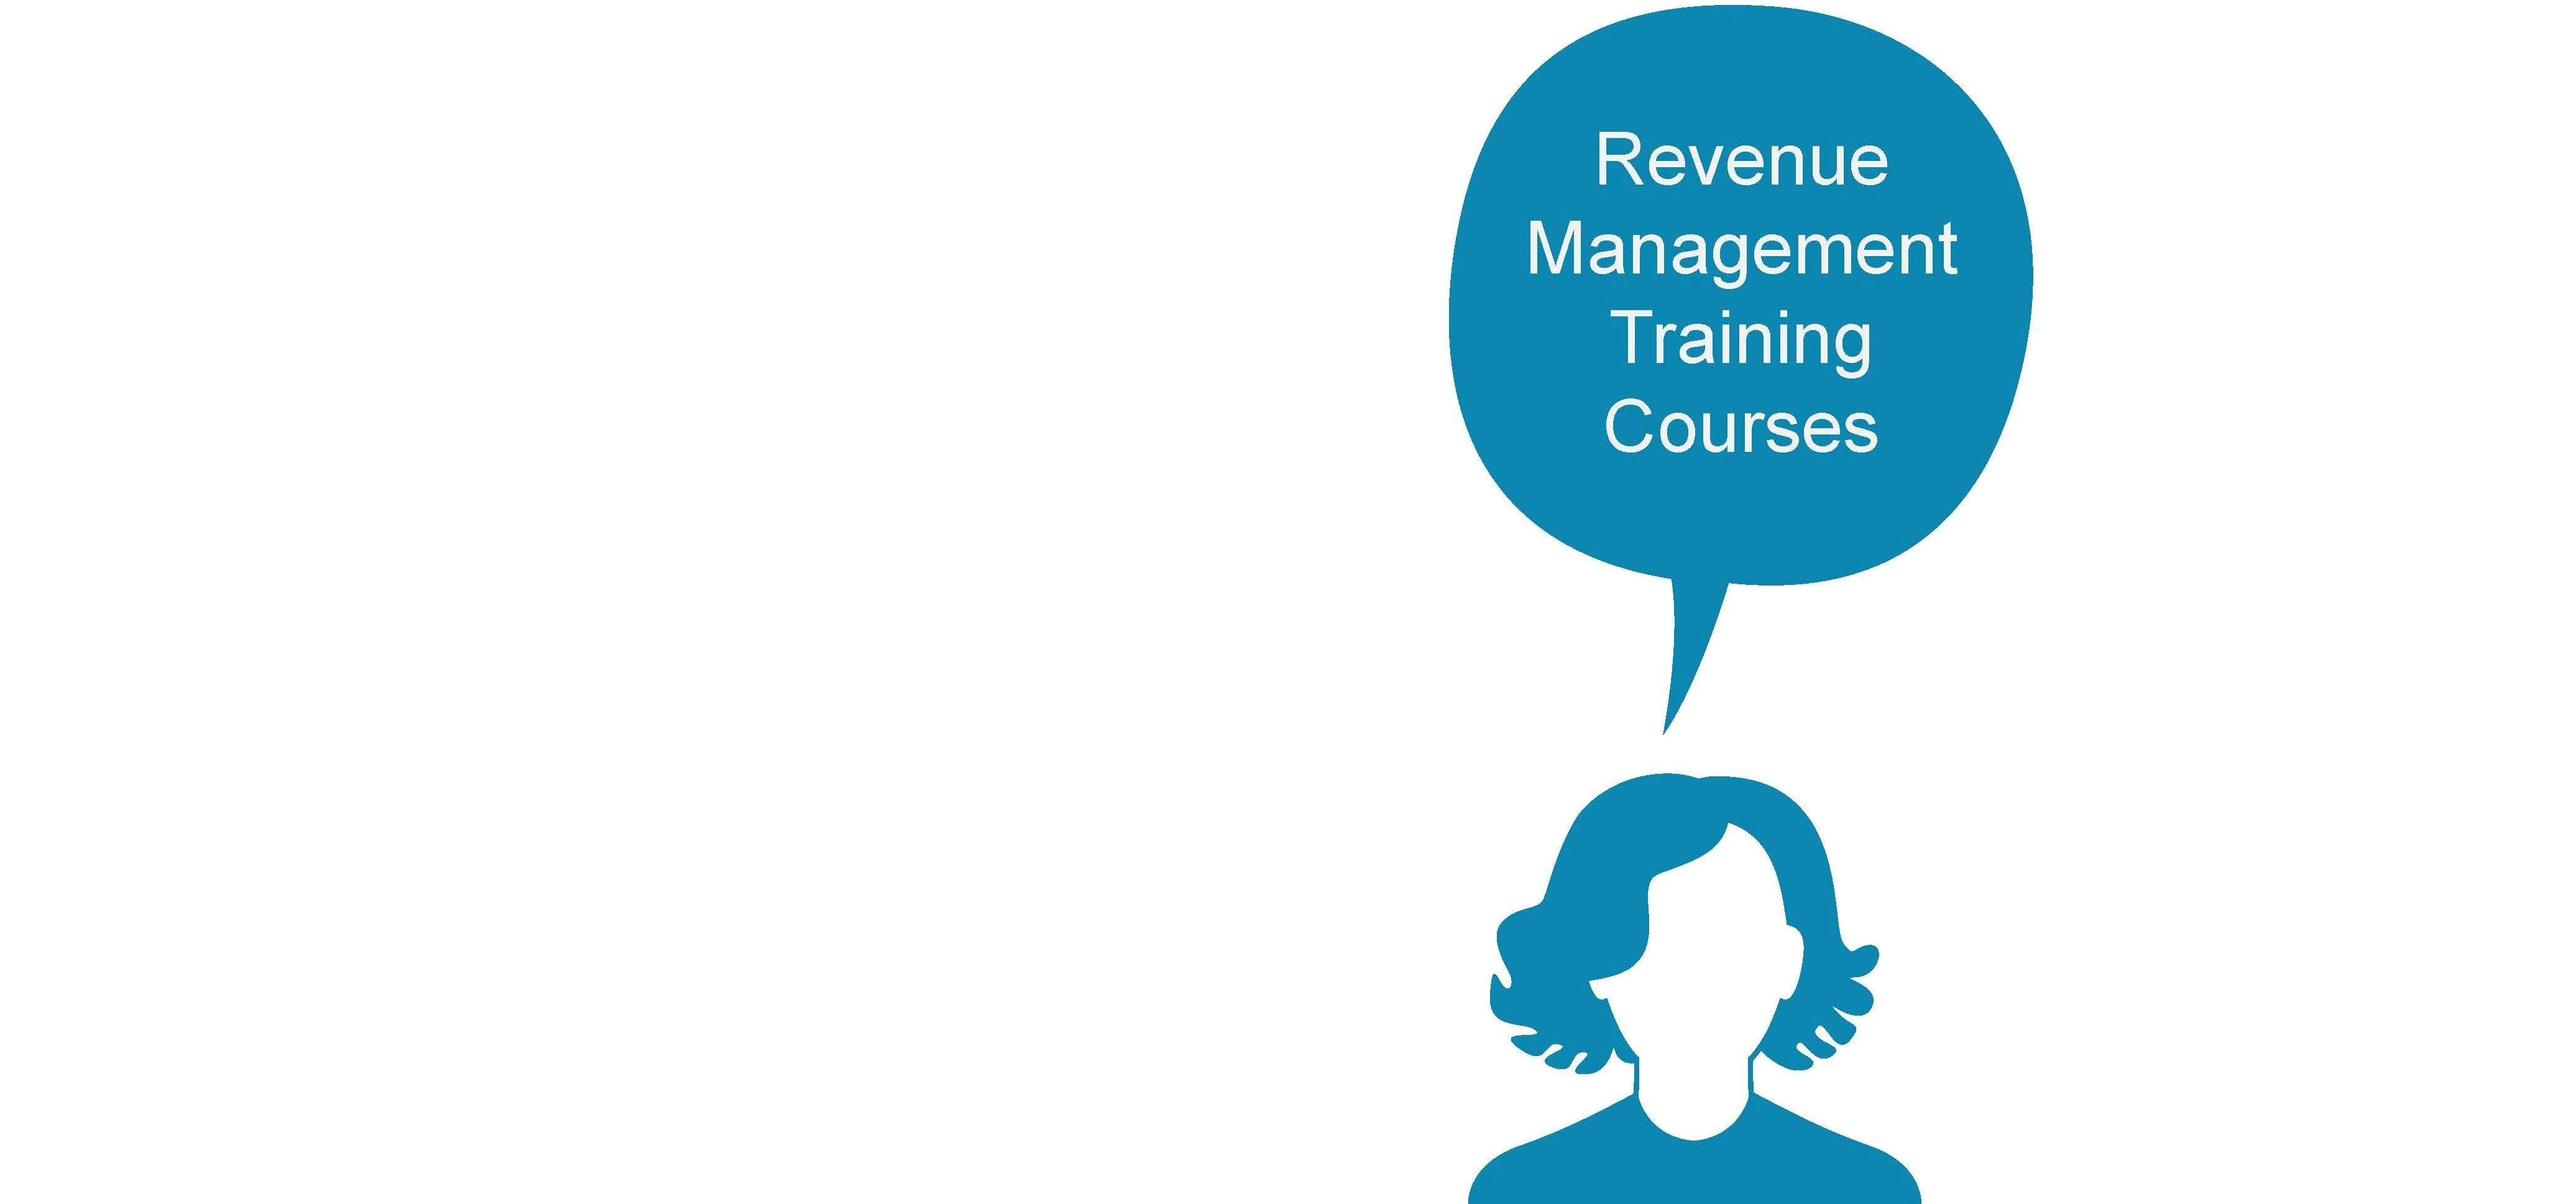 Providing Revenue Management courses in your hotel is thinking long-term.